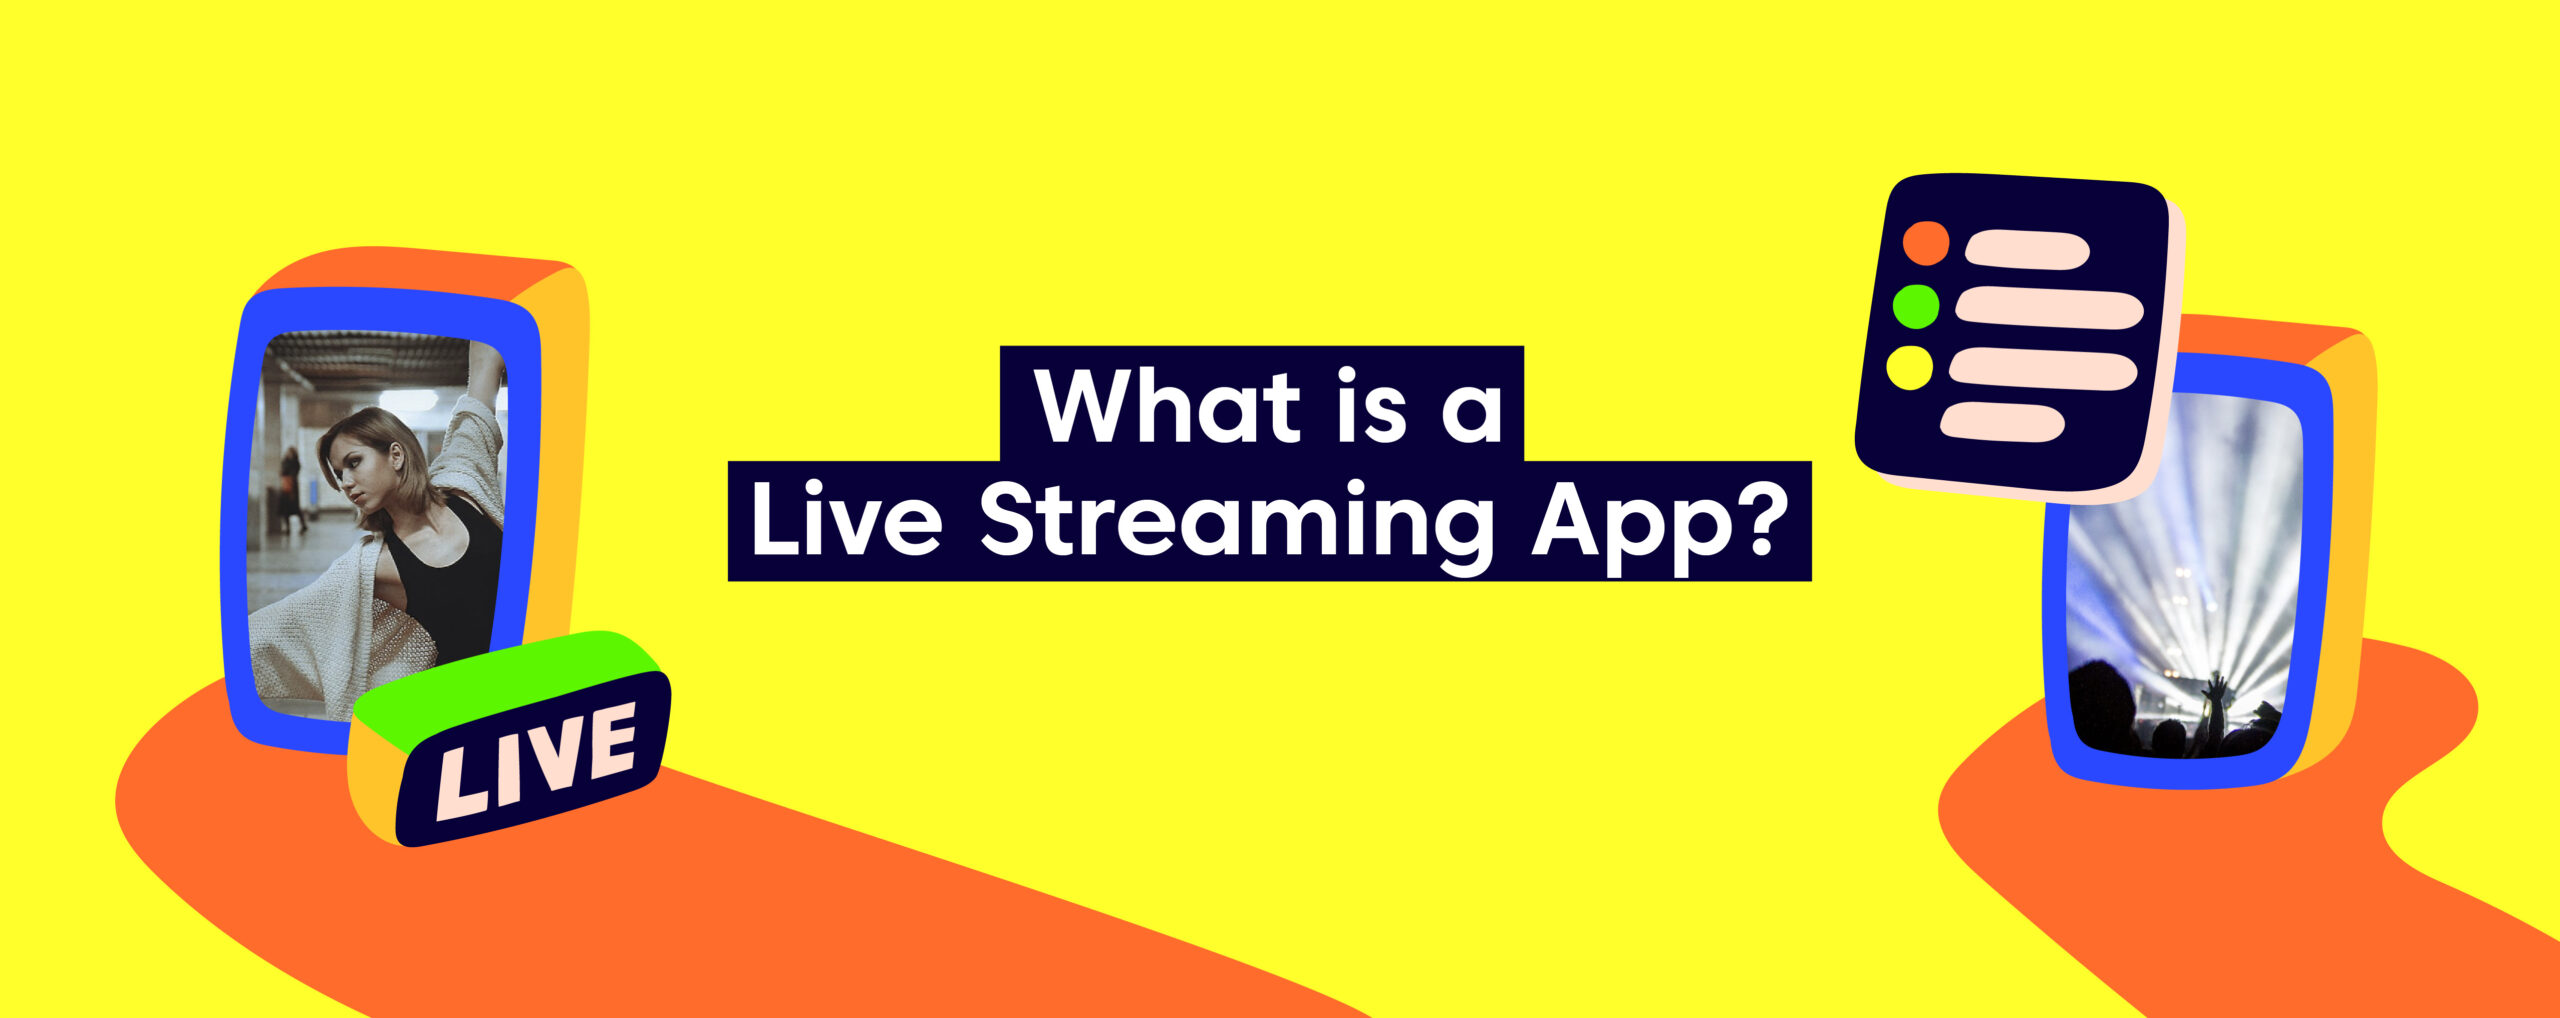 What is a Live Streaming App?